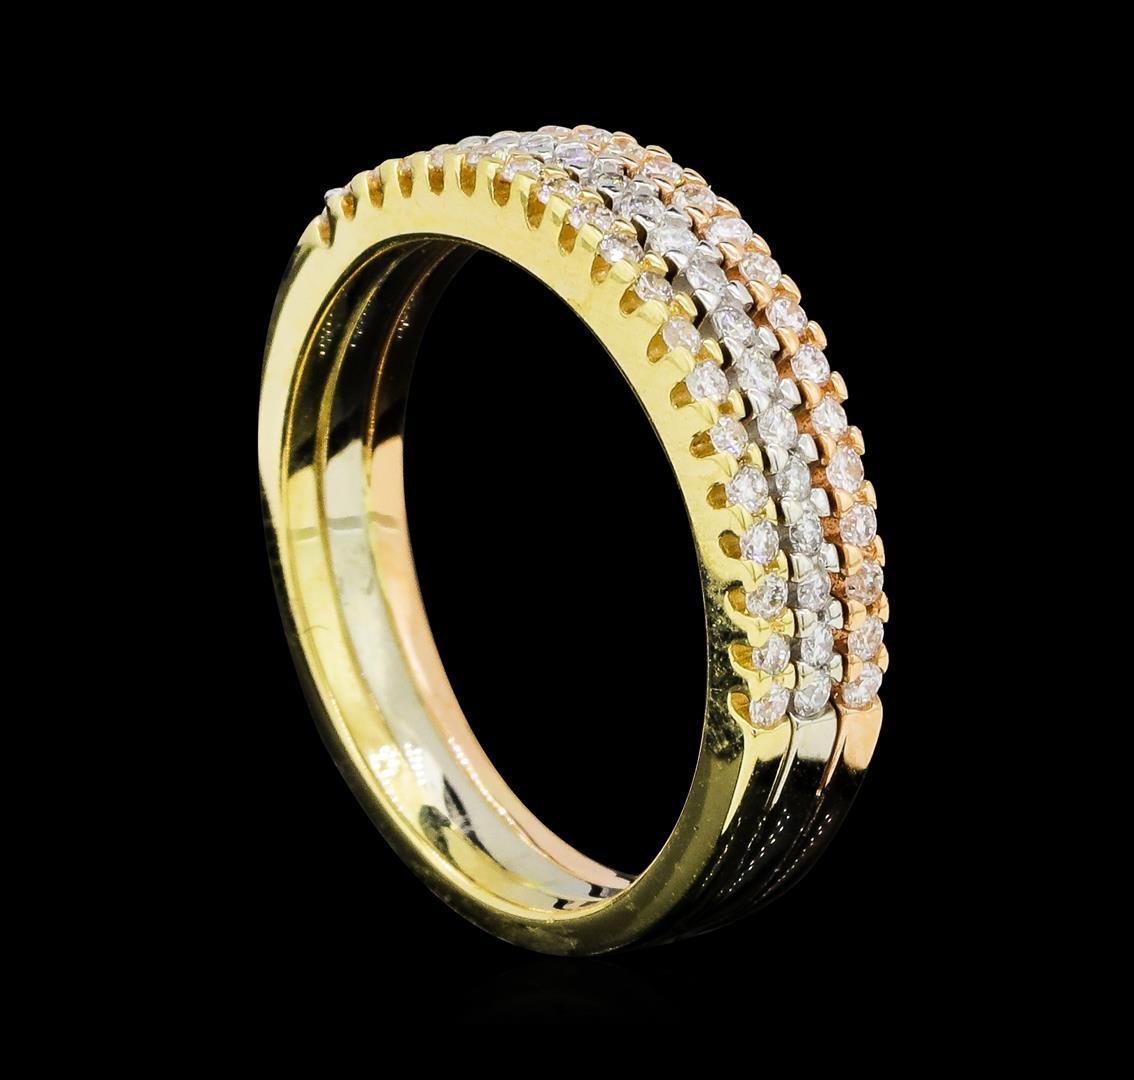 0.70 ctw Diamond Ring - 14KT Rose, White and Yellow Gold